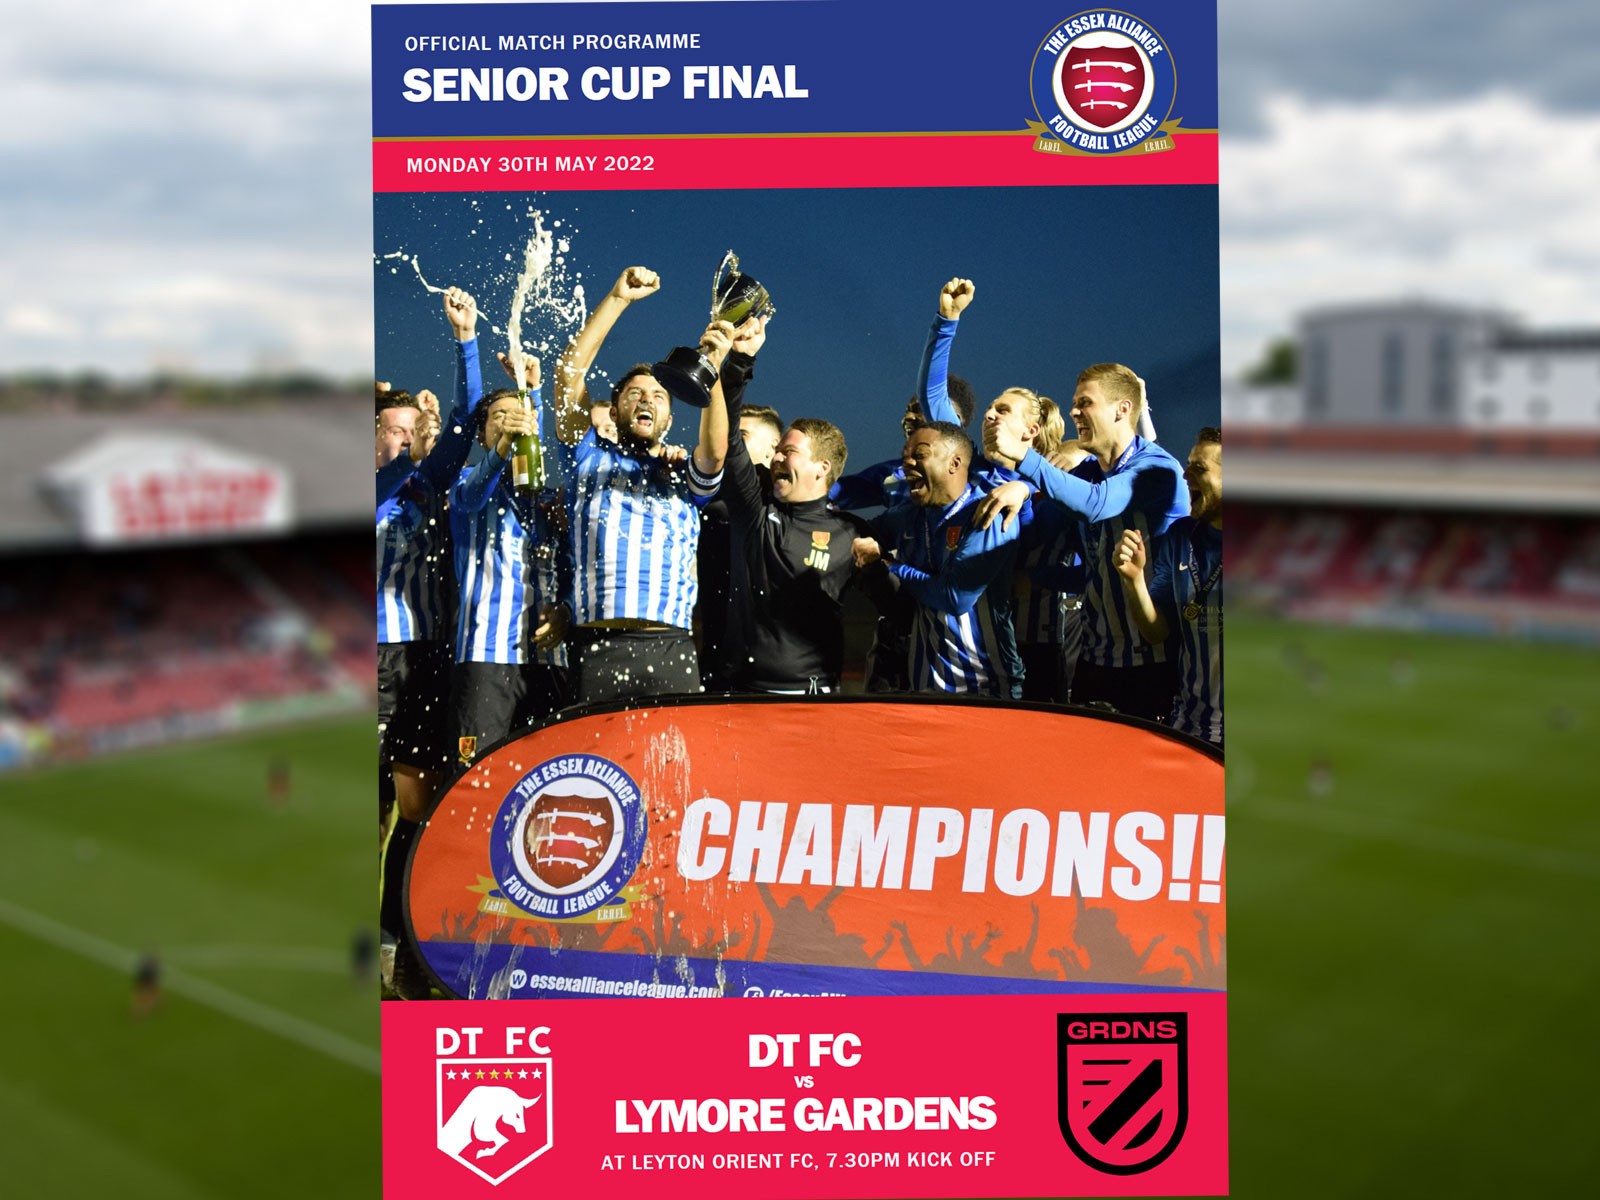 Senior Cup Final closes season with DT FC facing Lymore Gardens on Monday